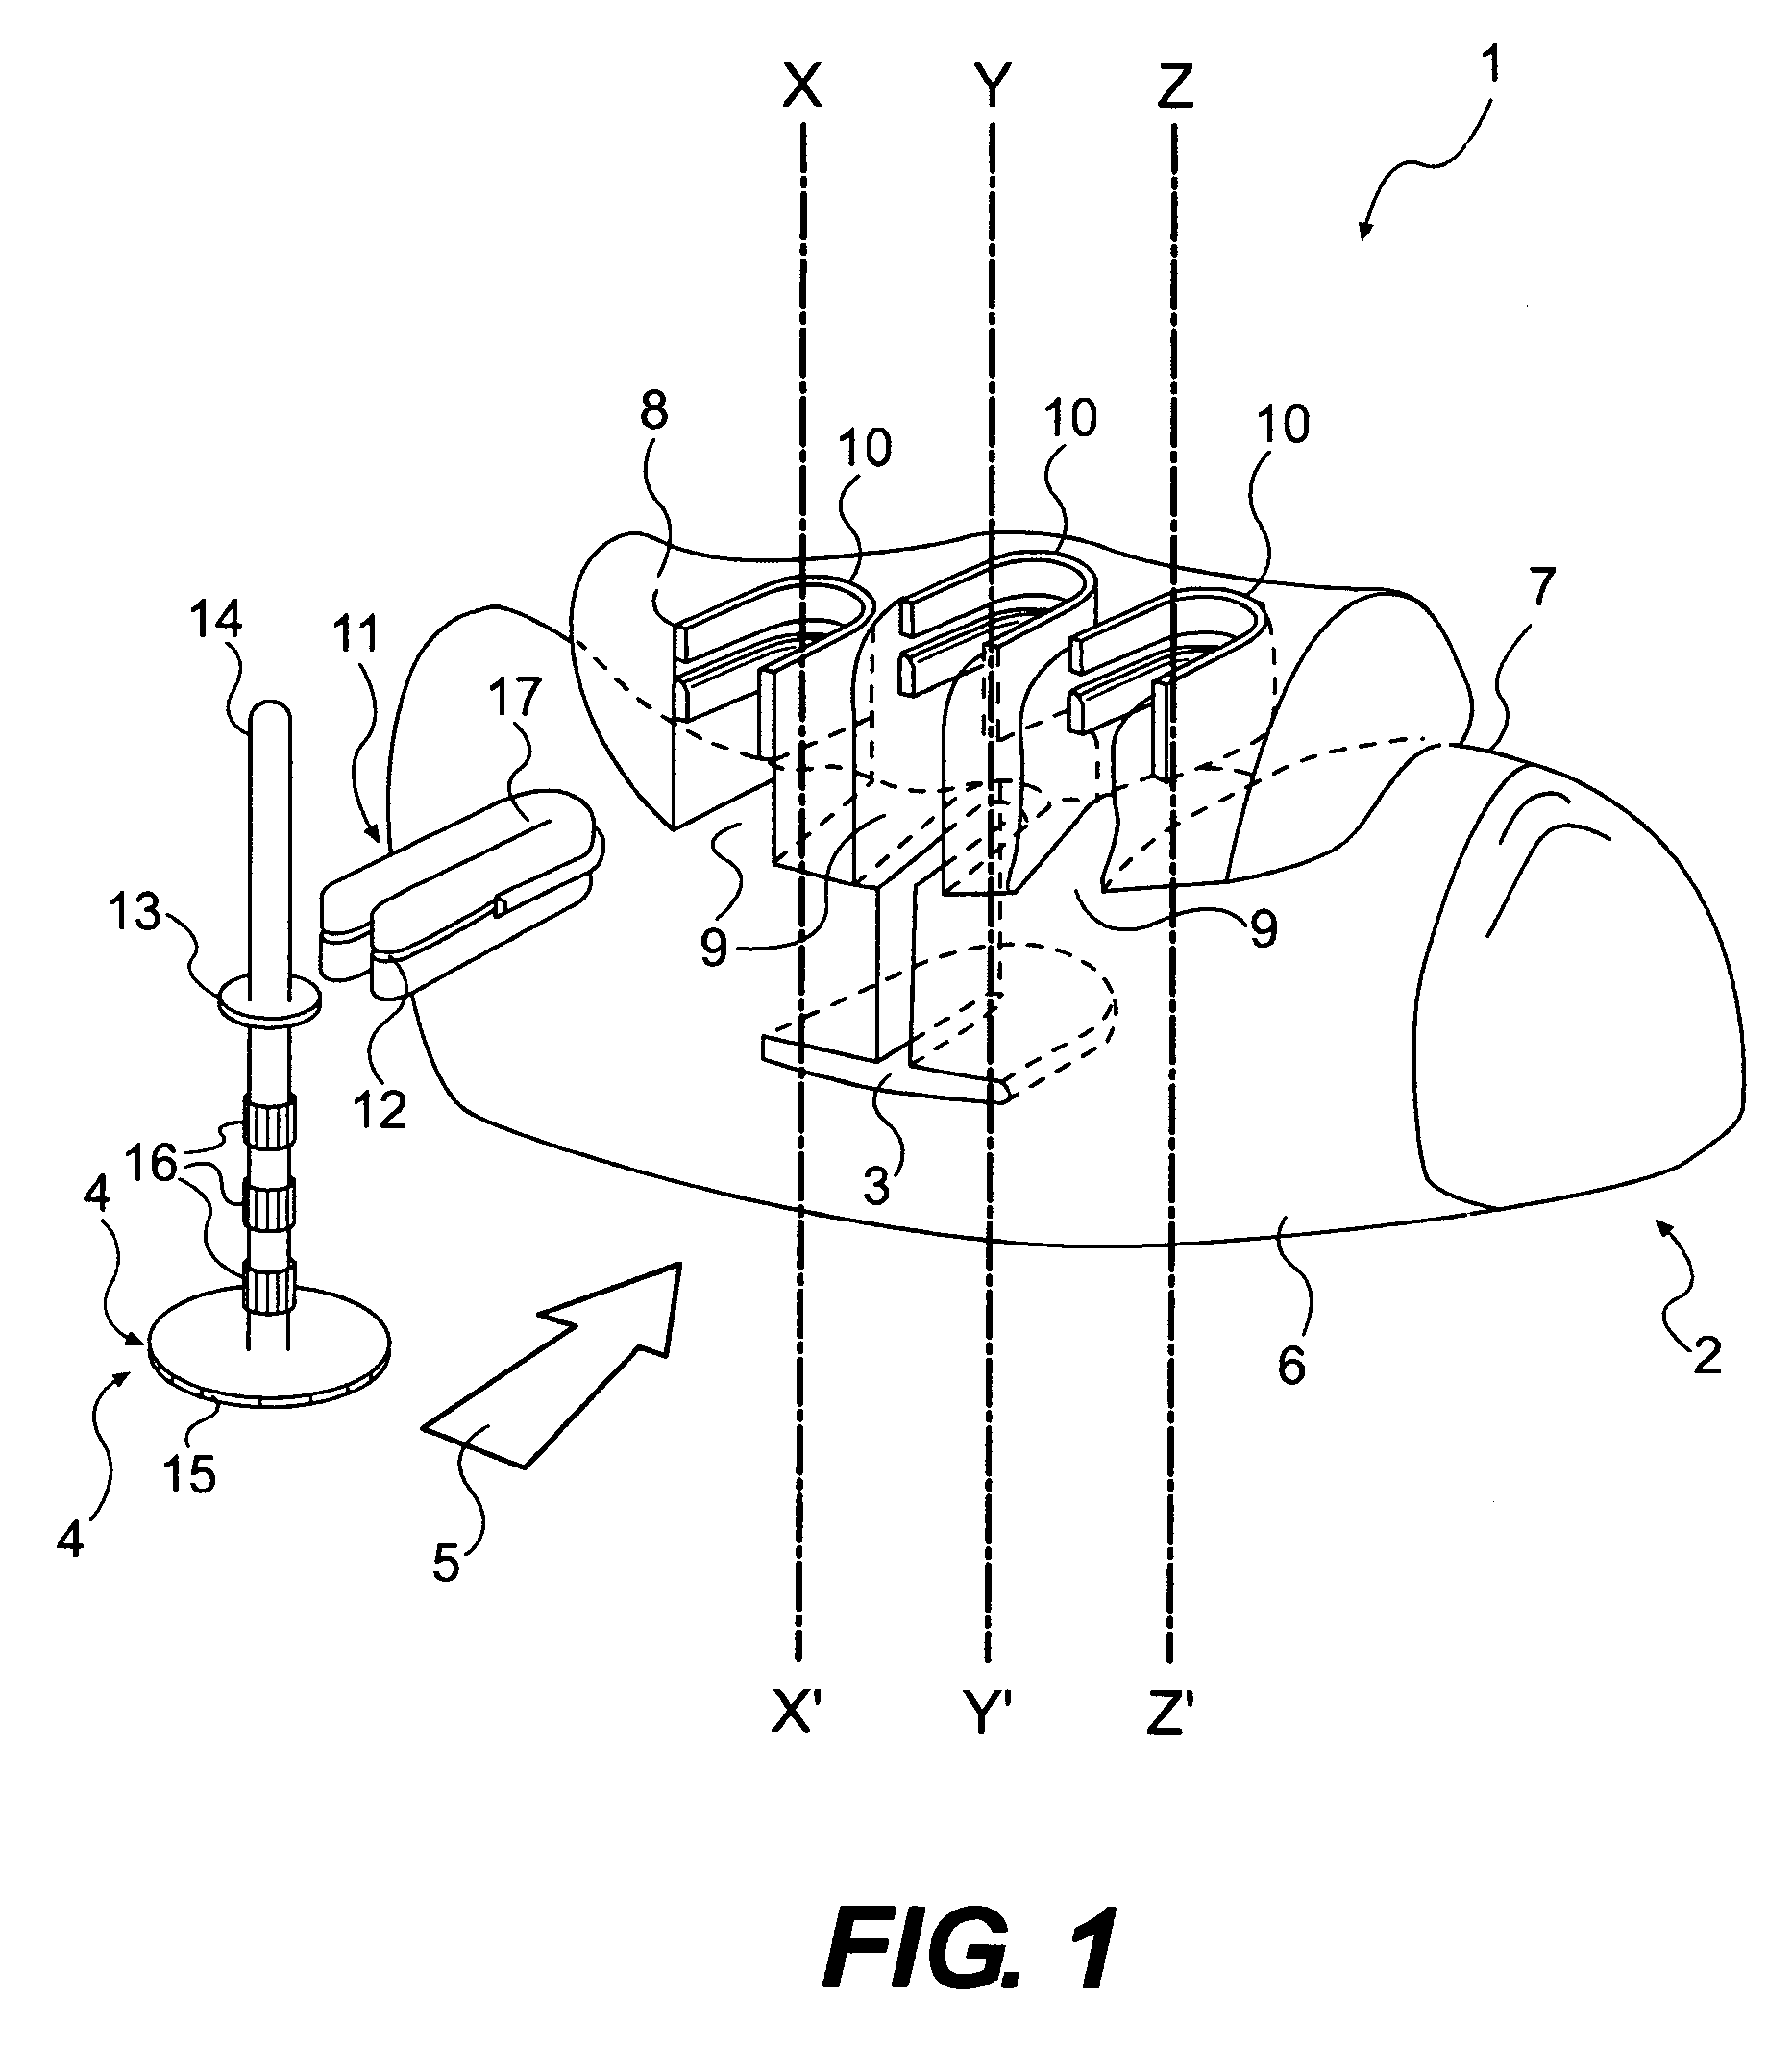 Custom-fit implant surgery guide and associated milling cutter, method for their production, and their use